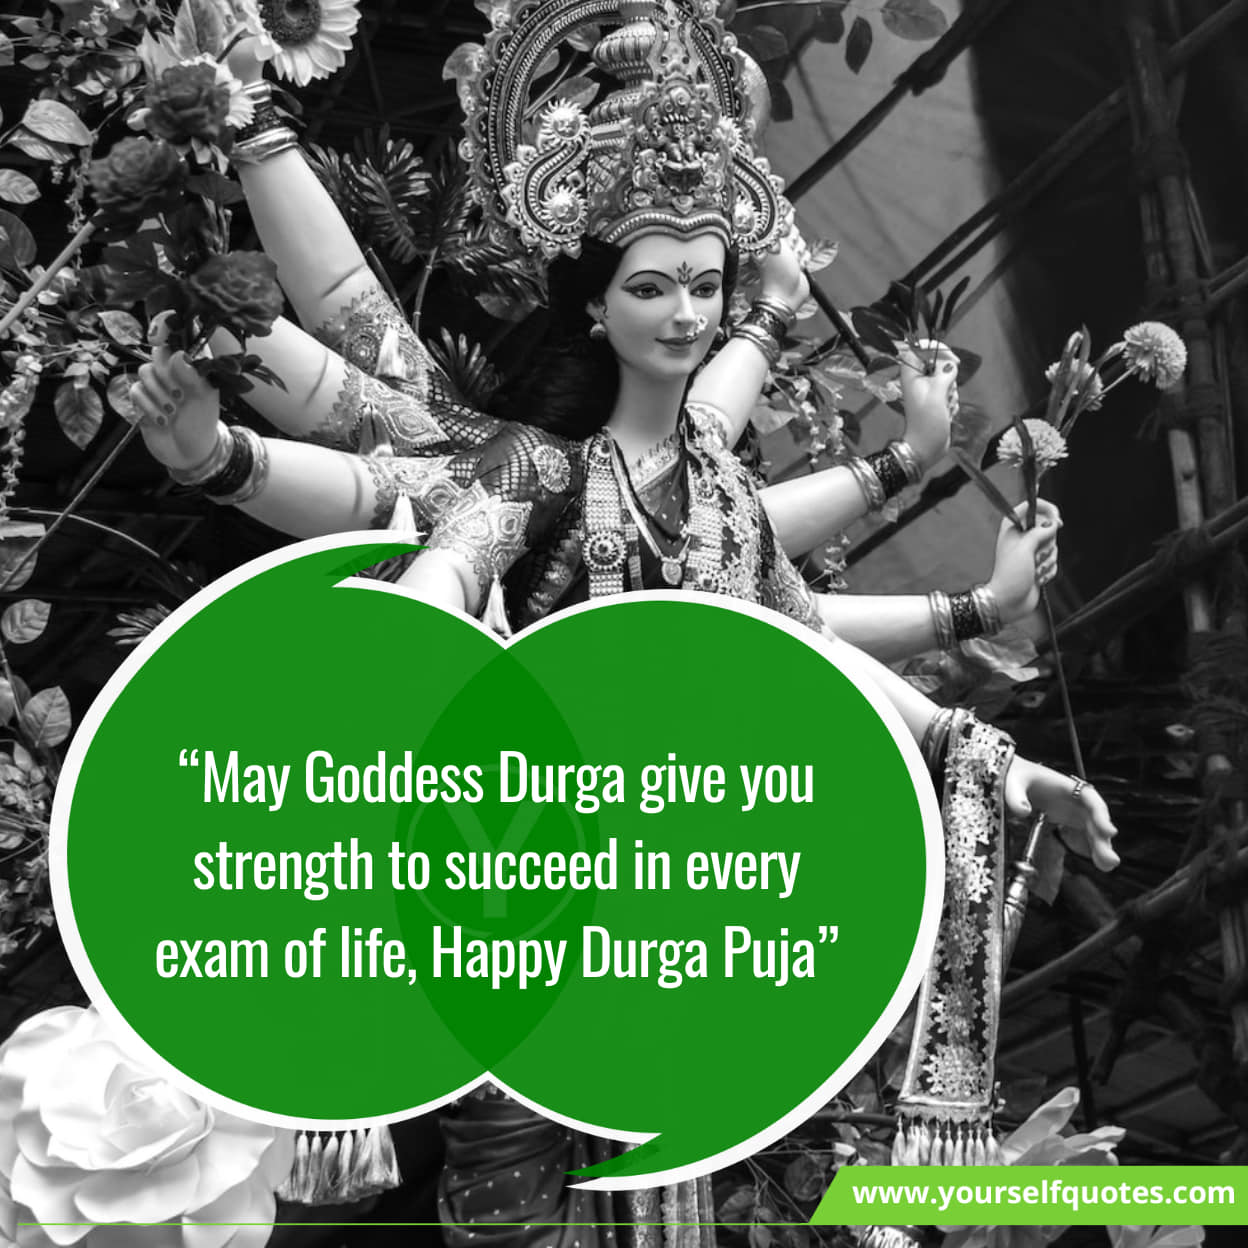 Durga Puja blessings for you and your family